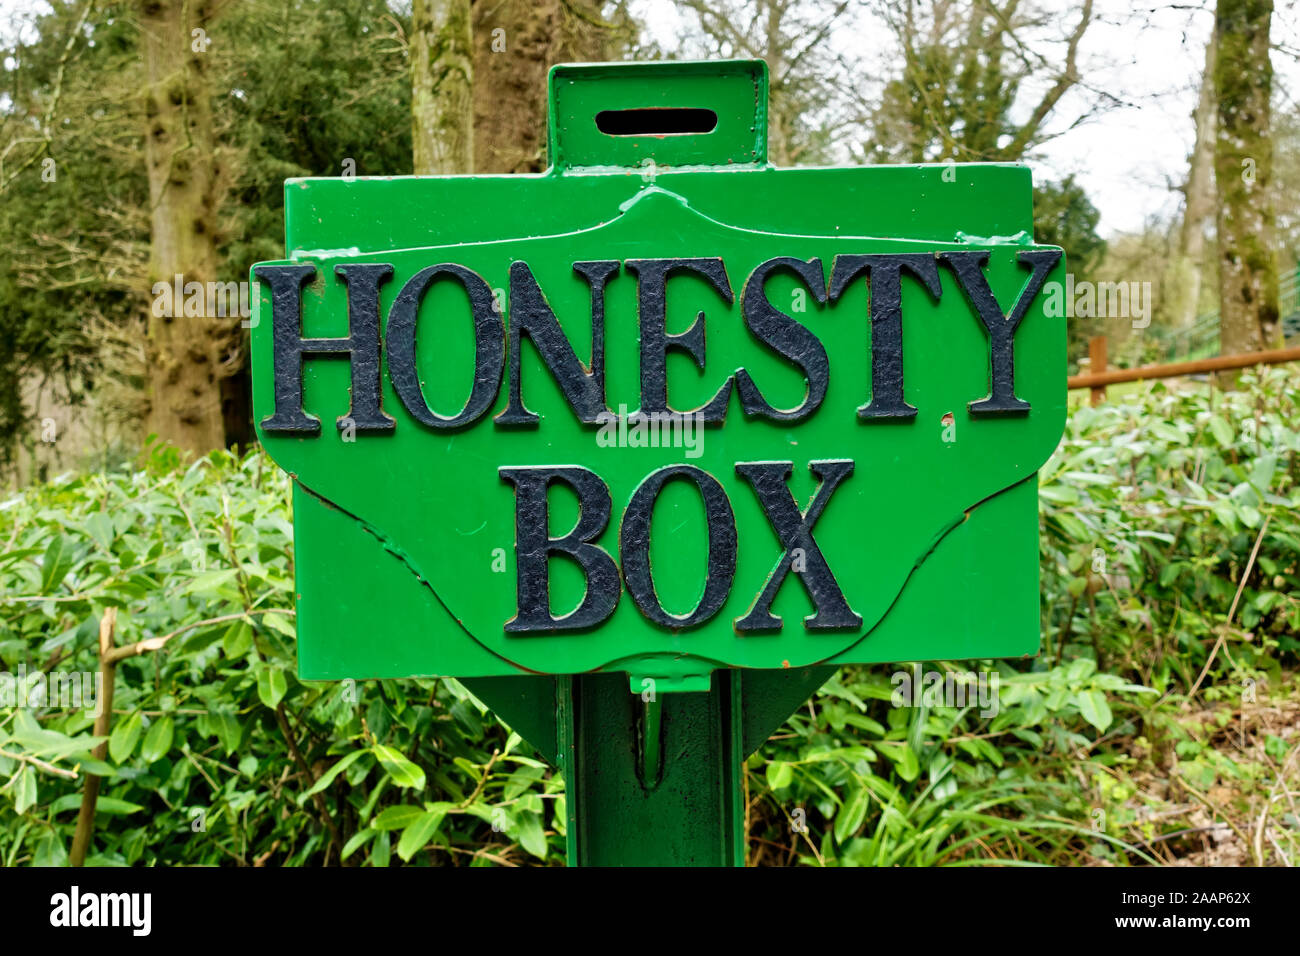 An Honesty Box at for admission to Shearwater lake near Crockerton in Wiltshire, England Stock Photo